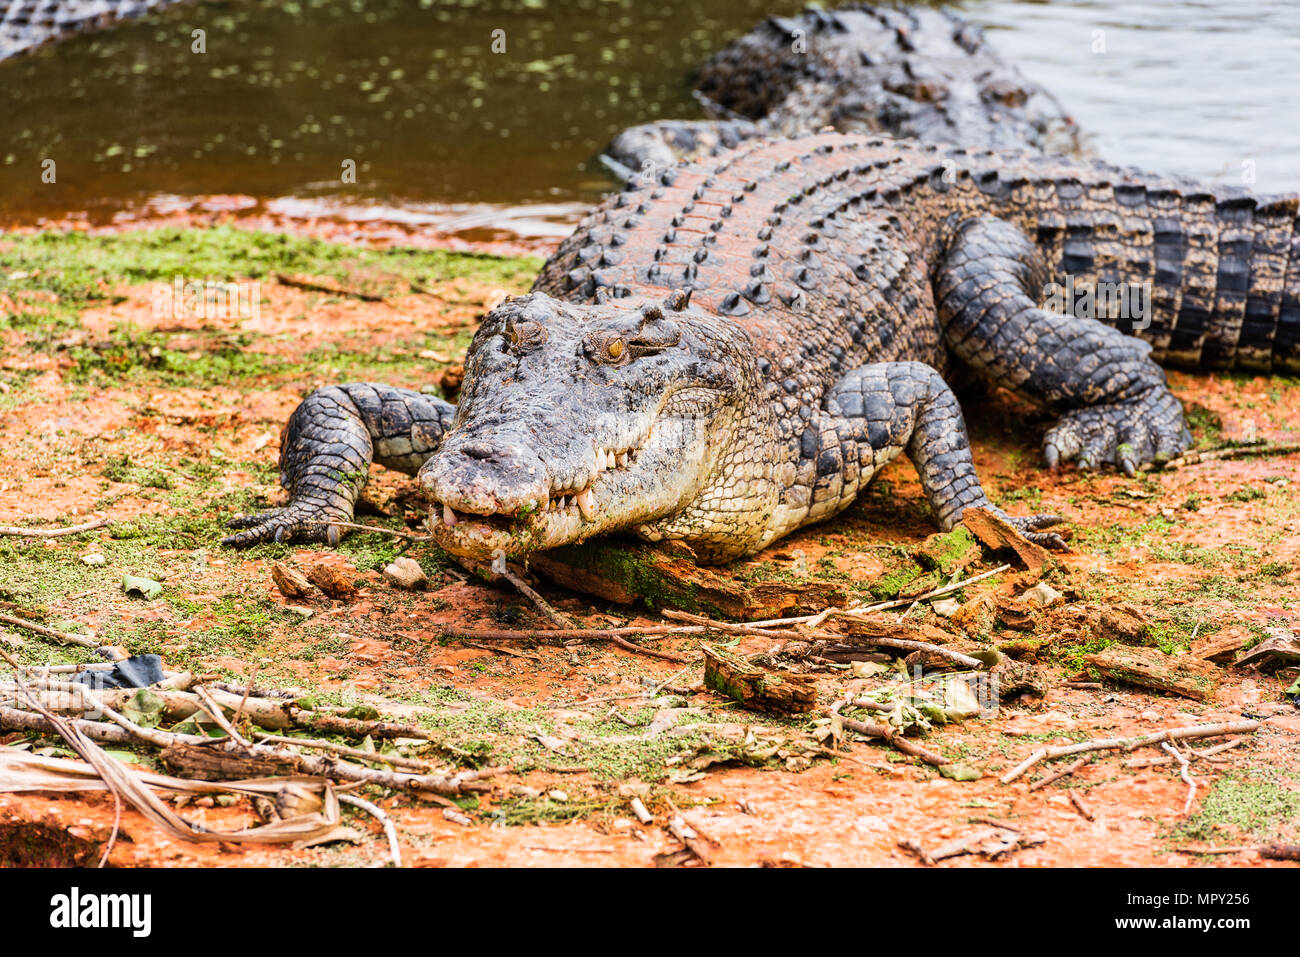 A hungry crocodile crawls out of the water in search of food Stock Photo -  Alamy